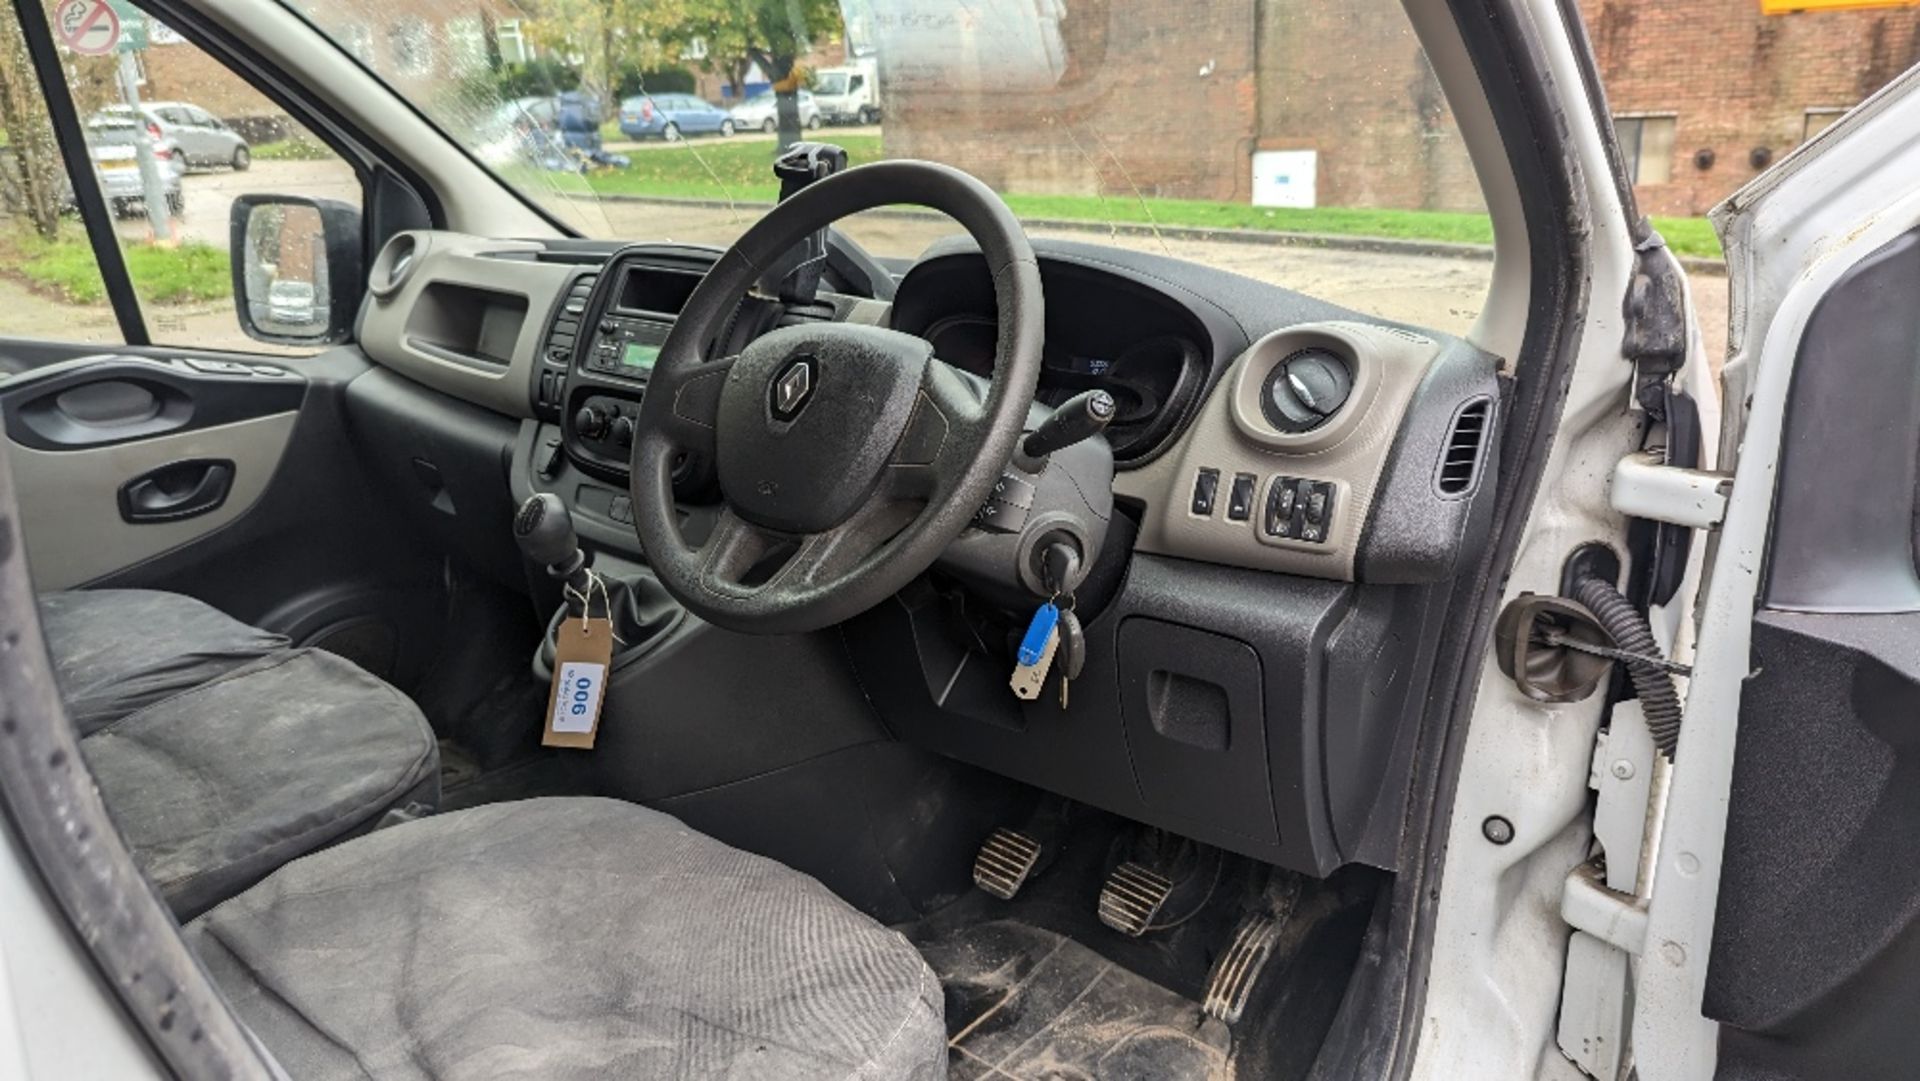 GY19 OCB - Renault Trafic SL27 Business+ DC - Image 9 of 19